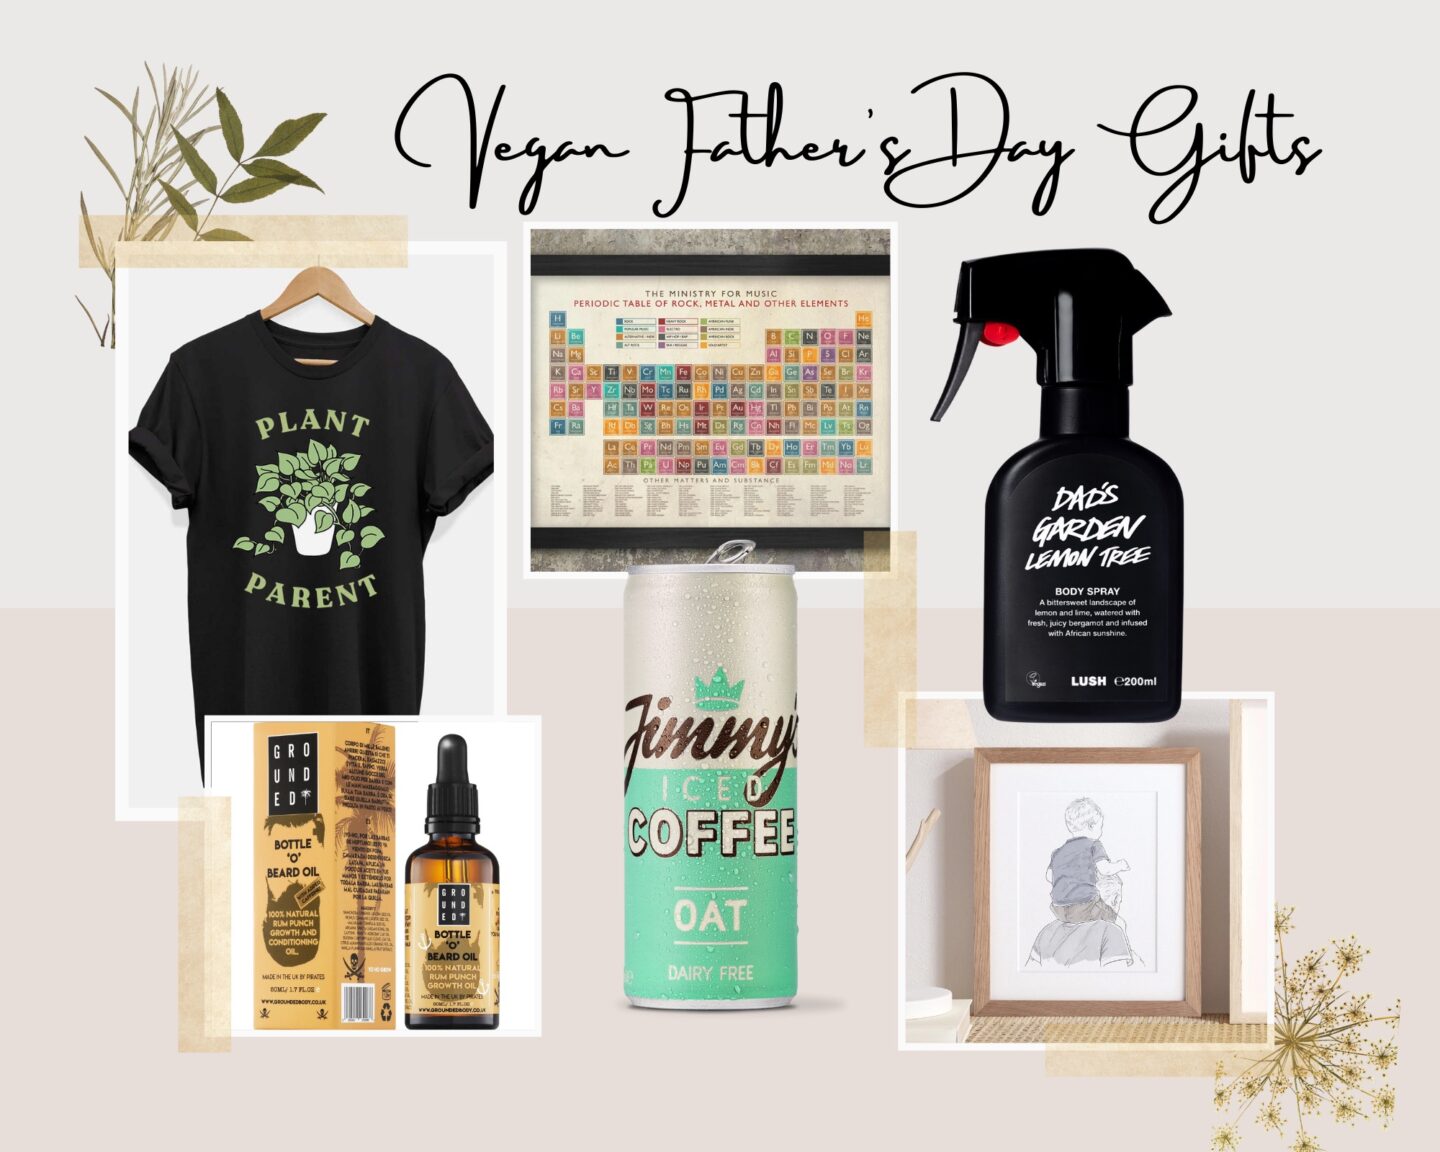 The 2022 Vegan Father's Day Gift Guide